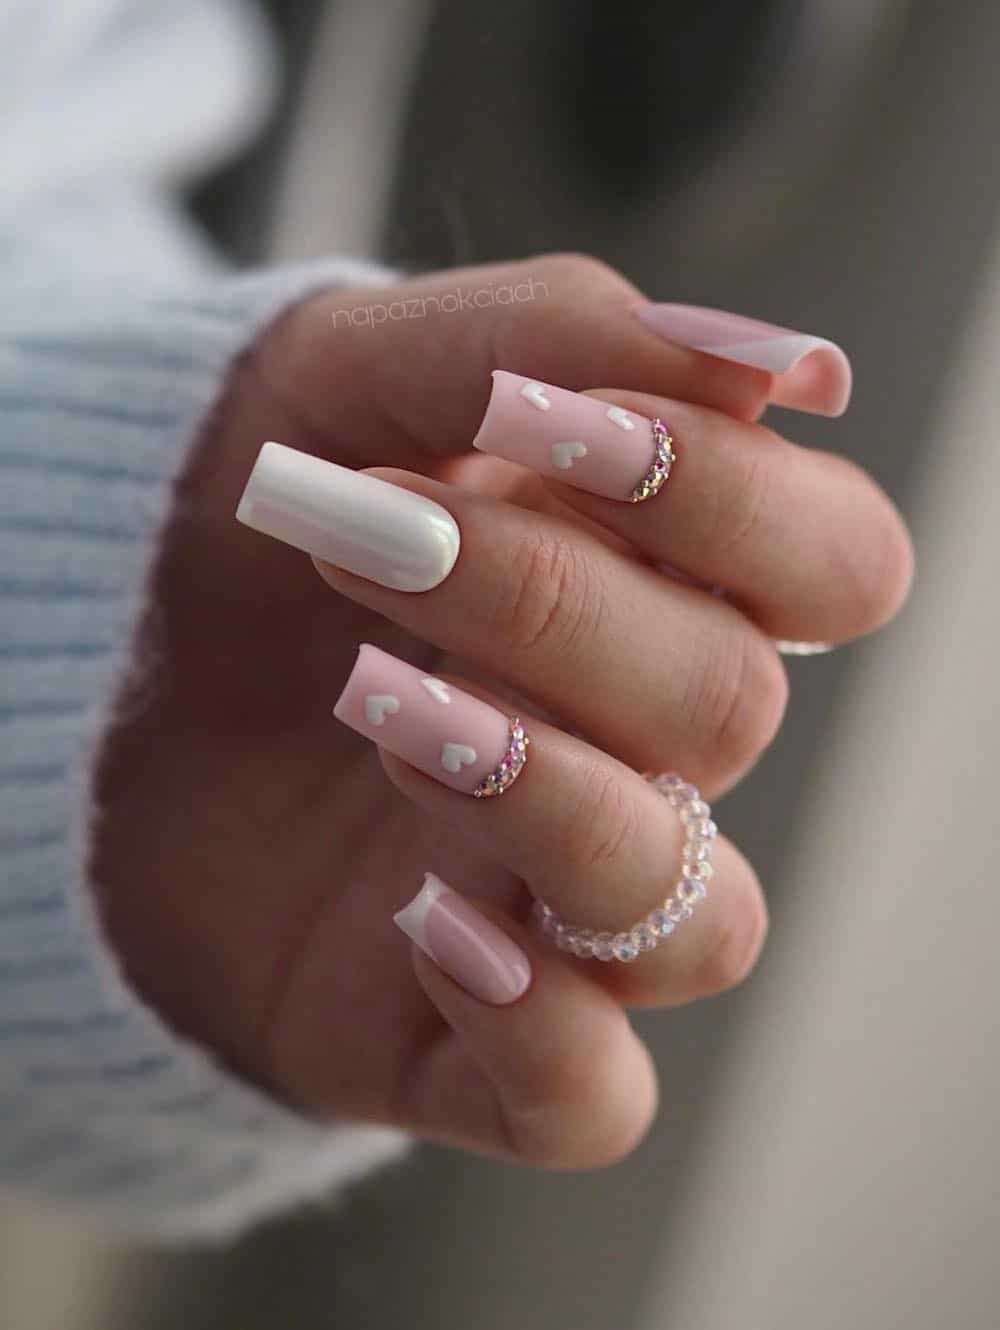 A hand with long square nails featuring a chrome white nail, light pink nails with white tips, and matte light pink nails with white hearts and gem accents